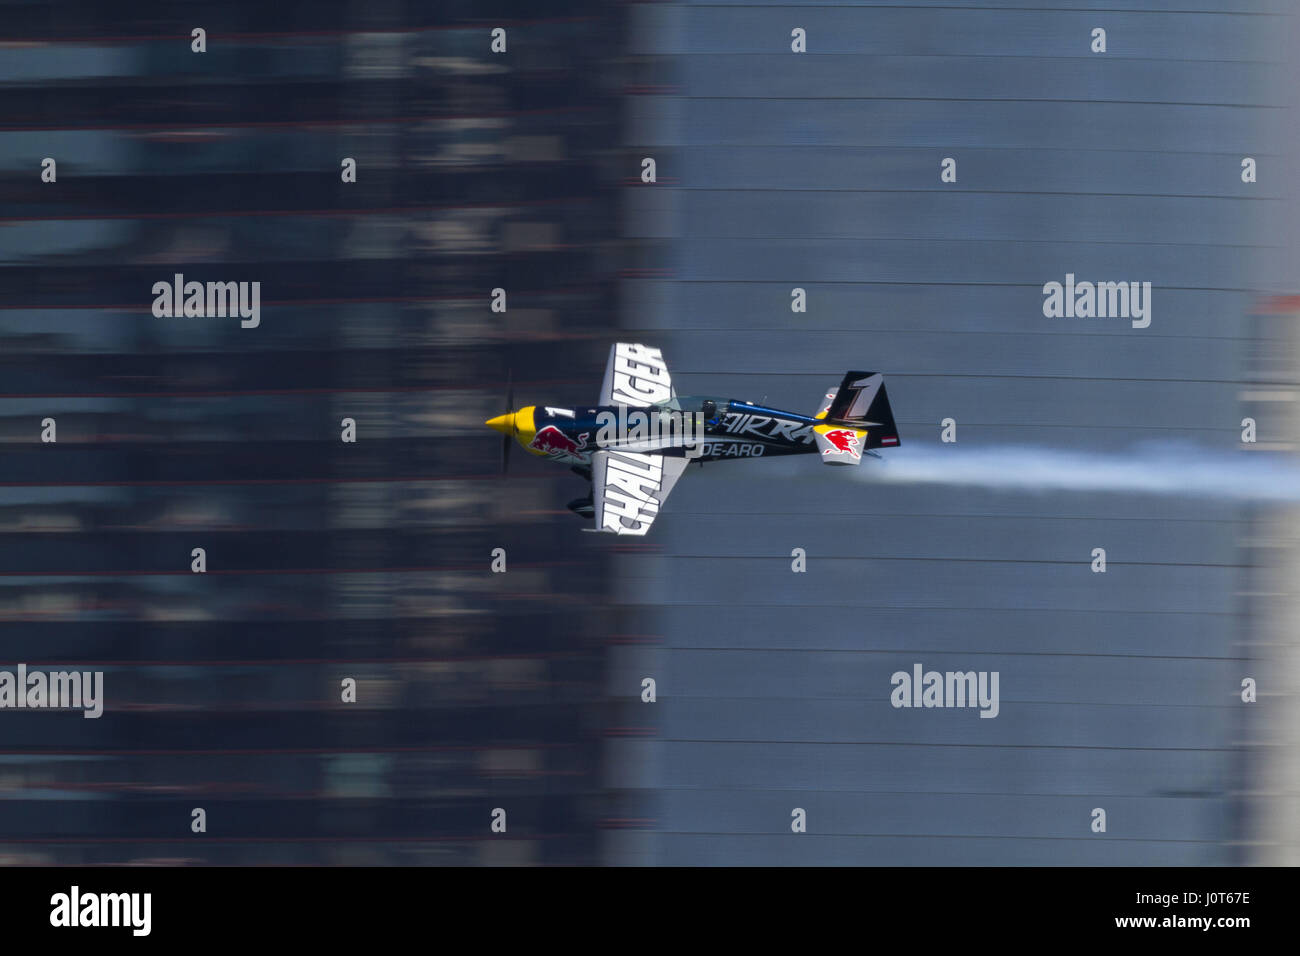 San Diego, USA. 15th Apr, 2017. On a beautiful sunny easter weekend, crowds line the beaches, rooftops, or anywhere they can to catch a glimpse of the planes screaming by.Challenger pilot Daniel Genevey of Hungary performs during the training at the second stage of the Red Bull Air Race World Championship in San Diego, United States on April 15, 2017 Credit: Daren Fentiman/ZUMA Wire/Alamy Live News Stock Photo